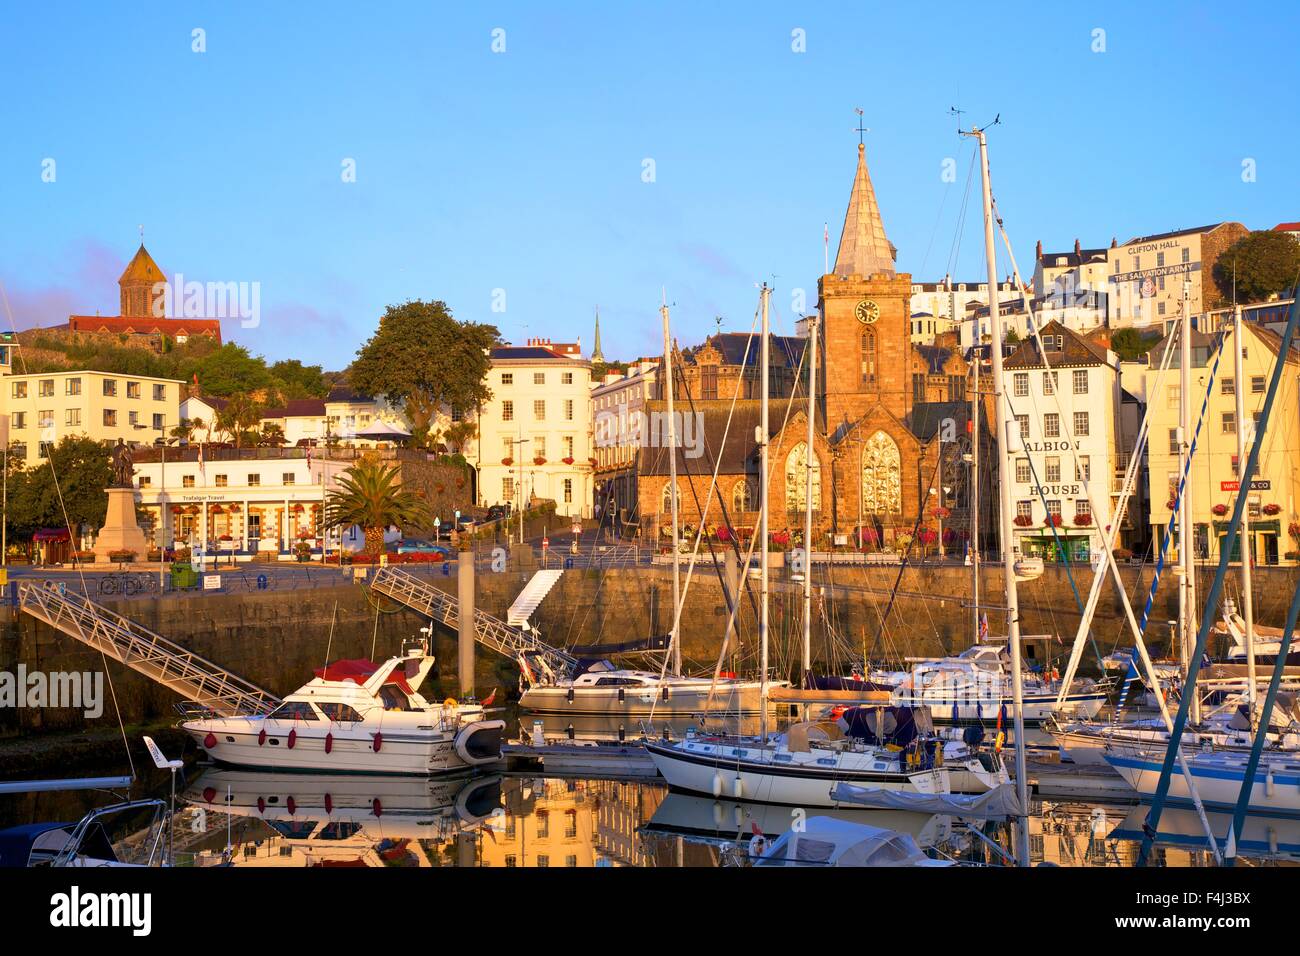 St. Peter Port Harbour, Guernsey, Channel Islands, United Kingdom, Europe Stock Photo